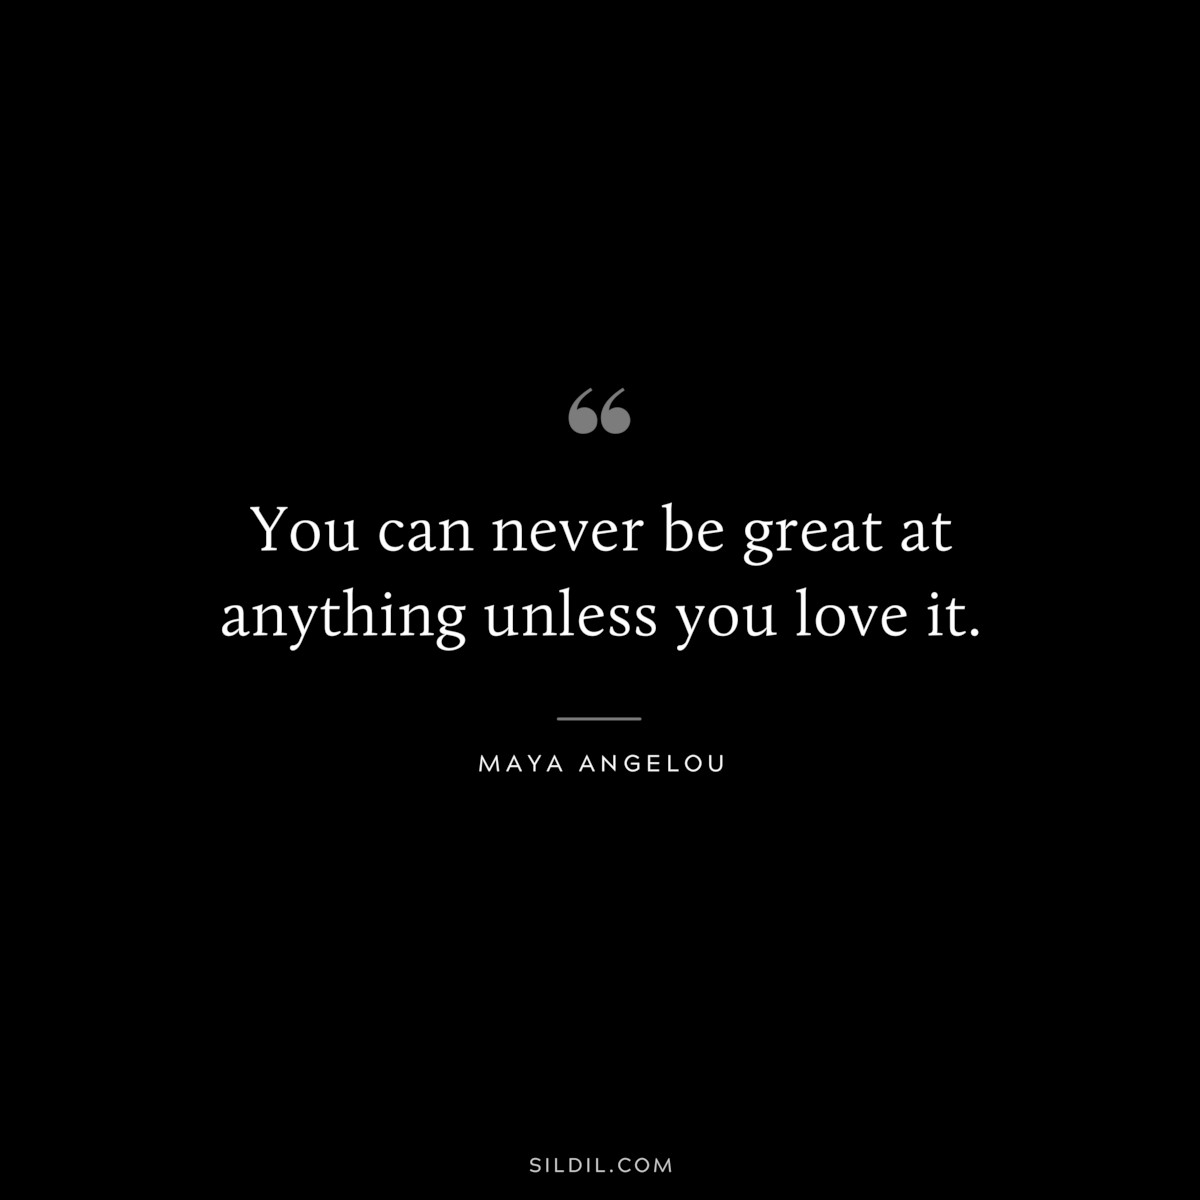 You can never be great at anything unless you love it. ― Maya Angelou